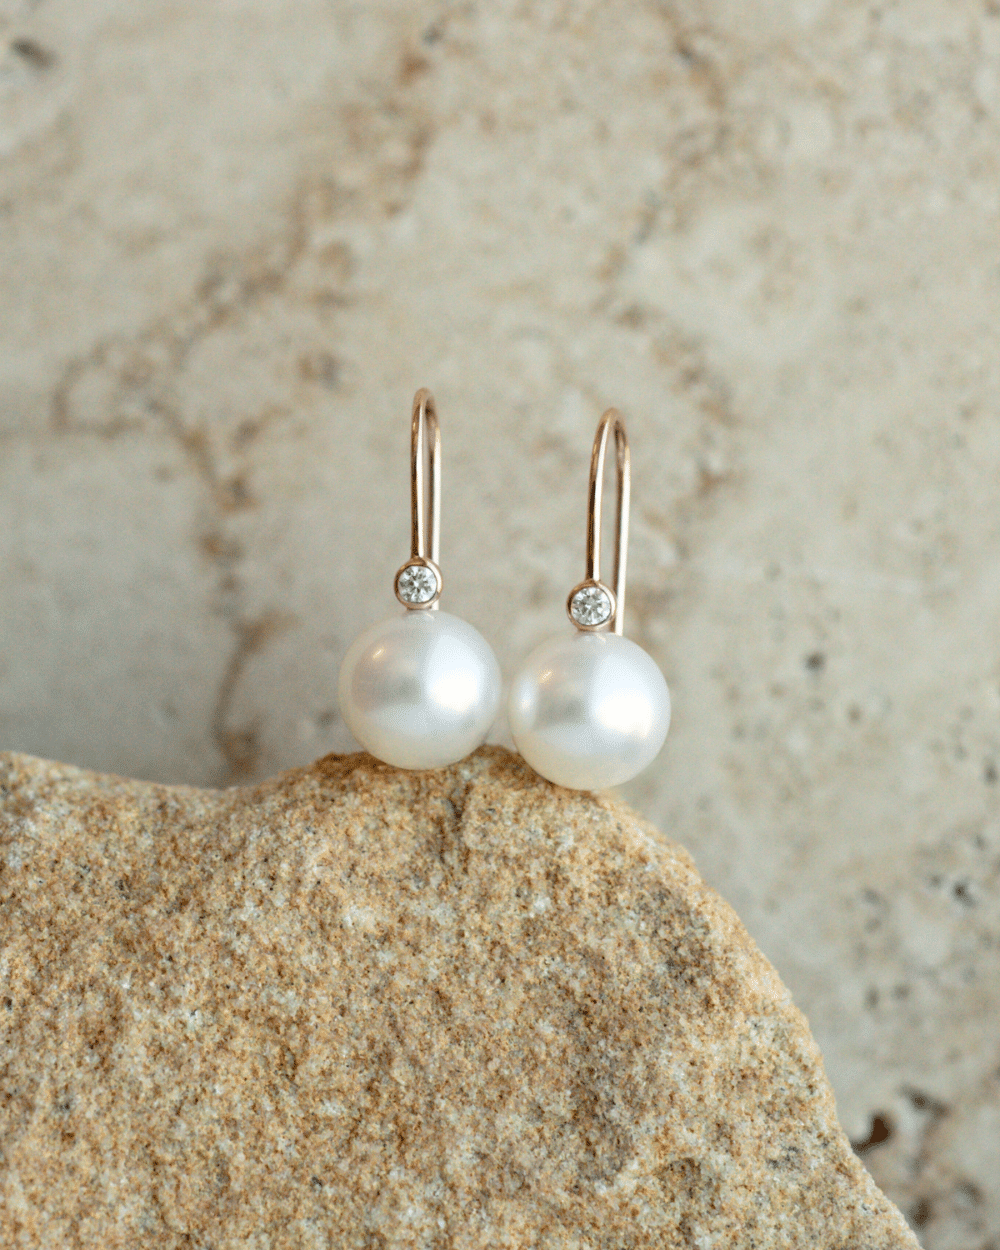 Rose Gold Nivea Earrings with South Sea pearls